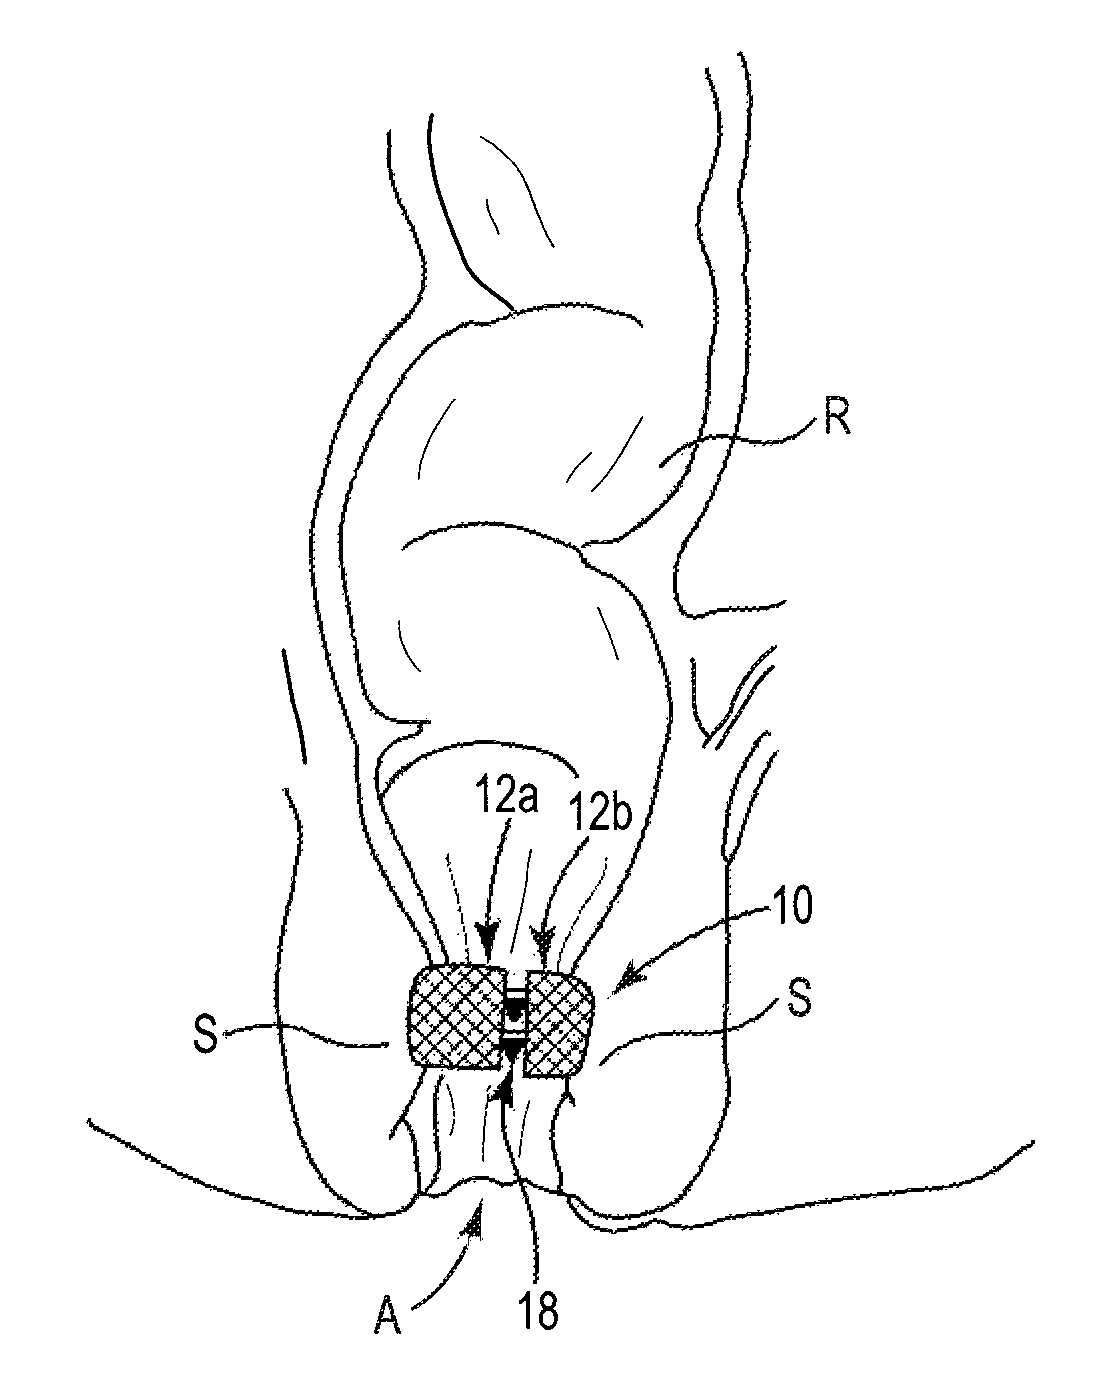 Fecal incontinence treatment device and method